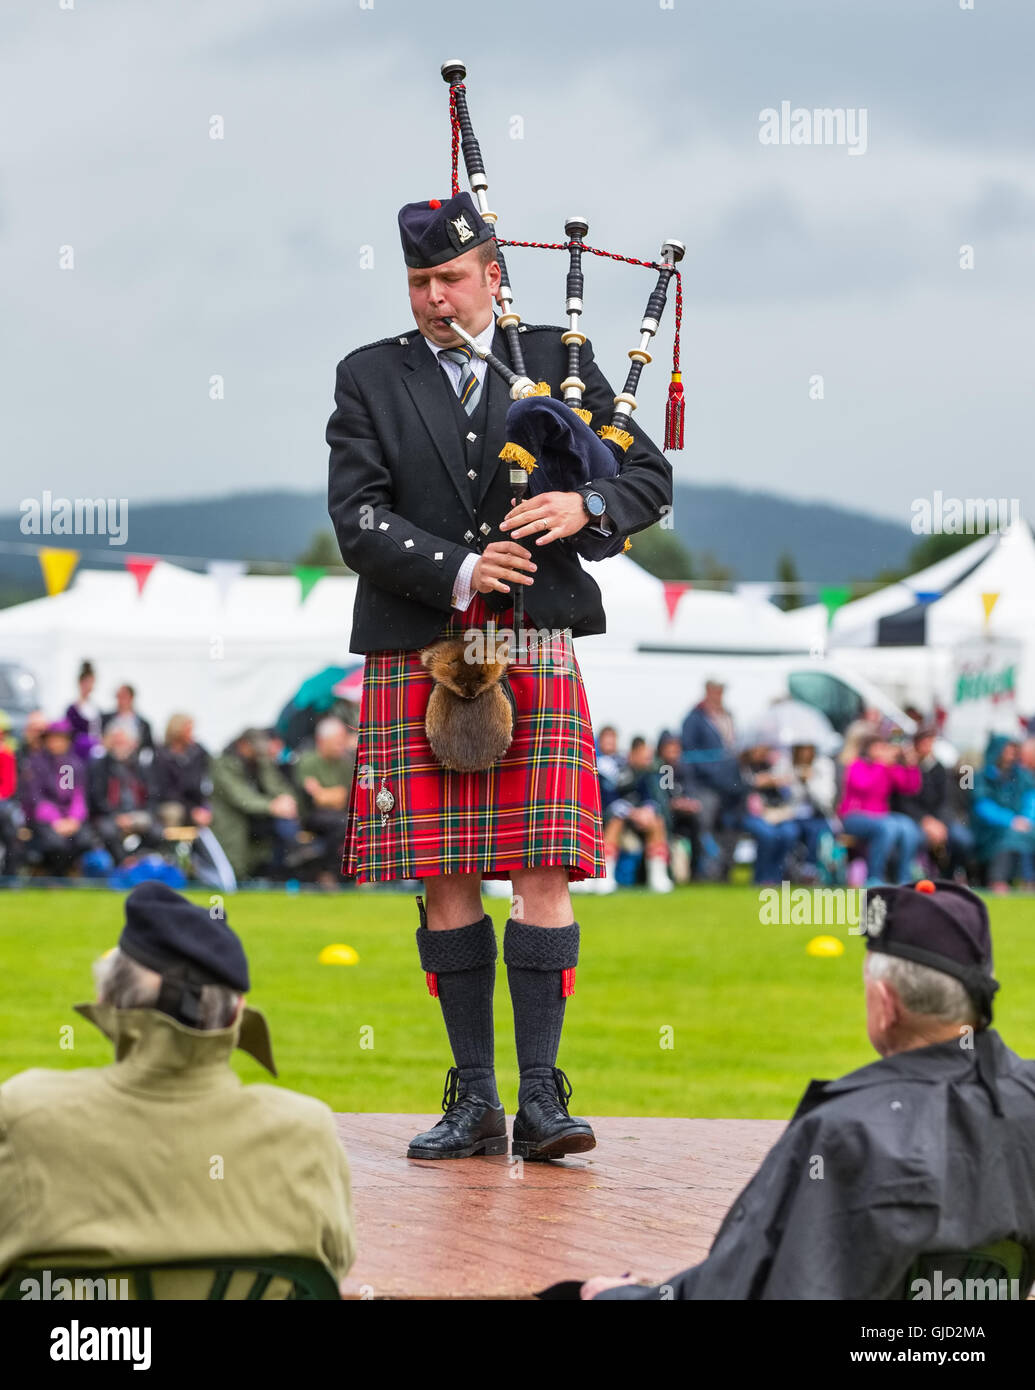 Ballater, Aberdeenshire,Scotland,UK. 11th August 2016. This is a scene from the activities within Ballater Highland Games. Stock Photo